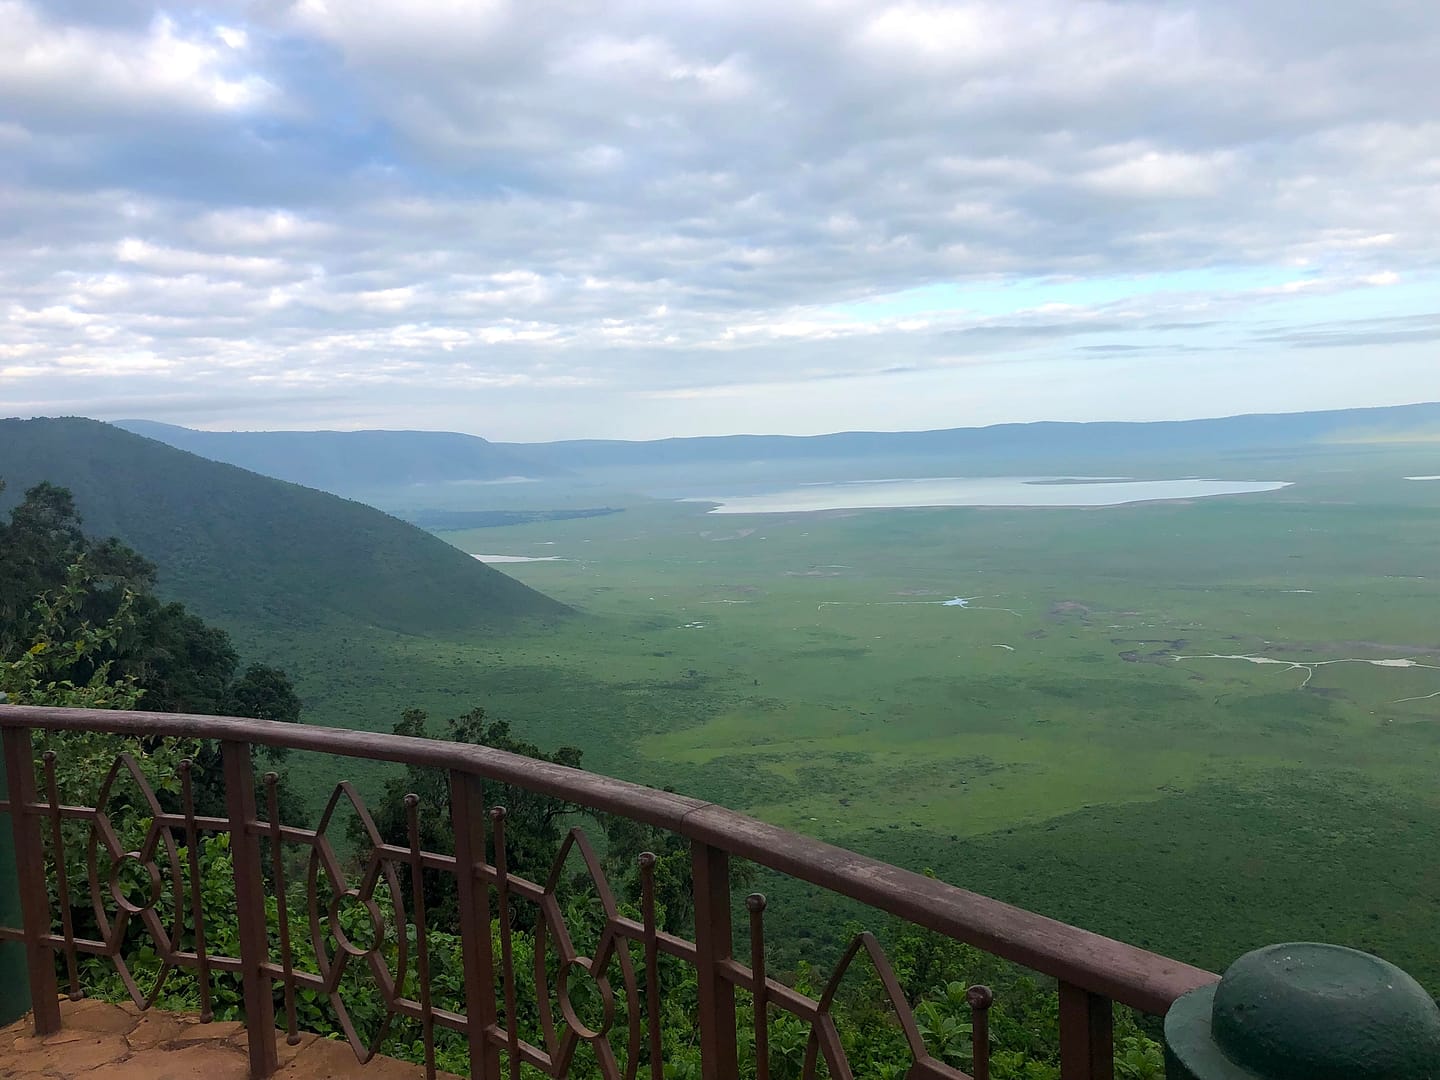 Is Tanzania safe? This image is of the view from the rim of ngorongoro crater in Tanzania